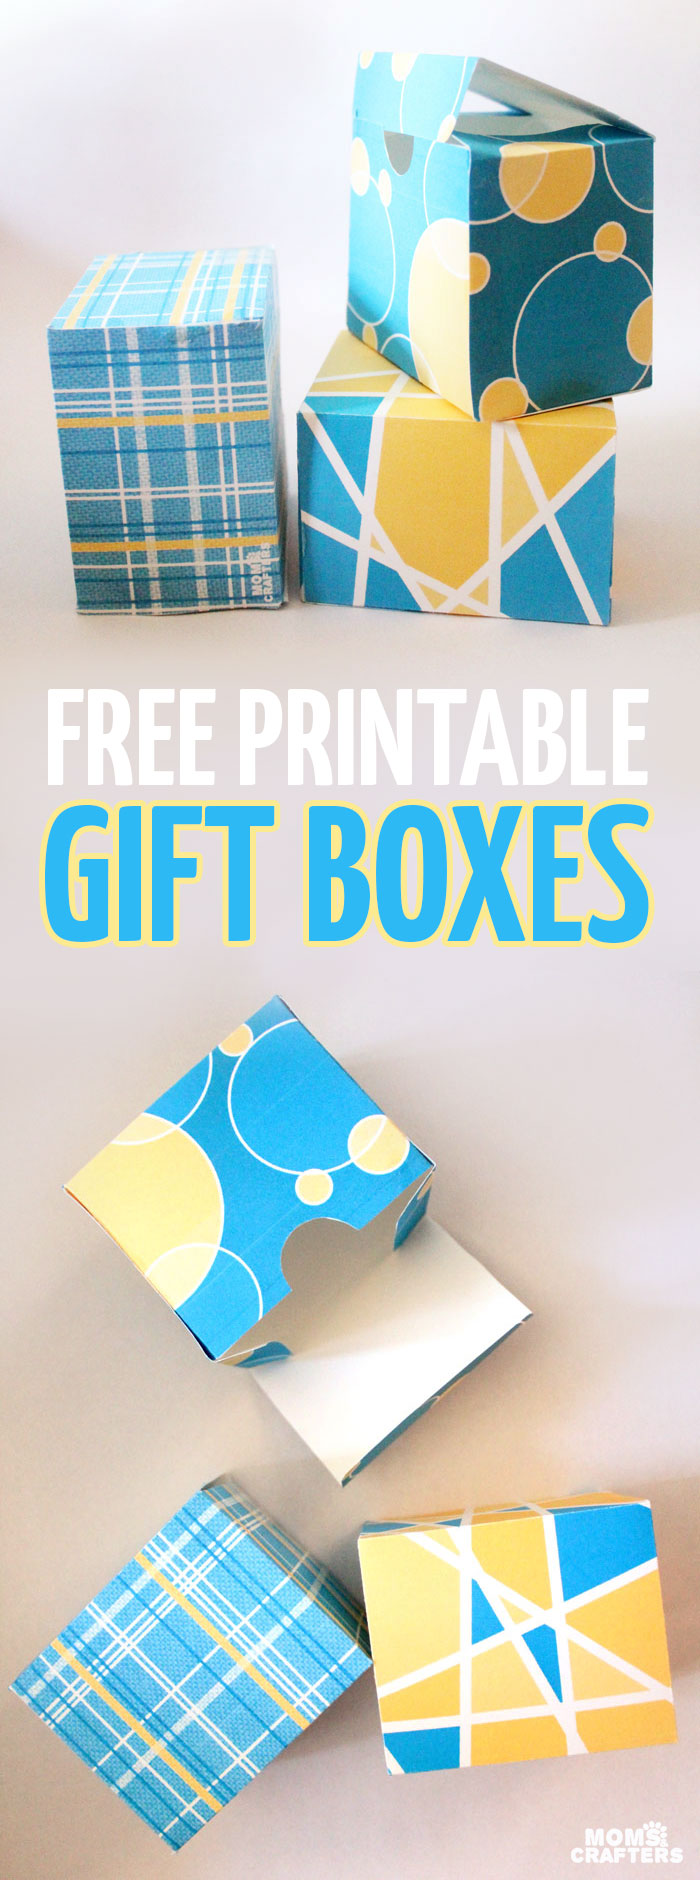 Let's Wrap! Free Printable Gift Boxes - Picklebums